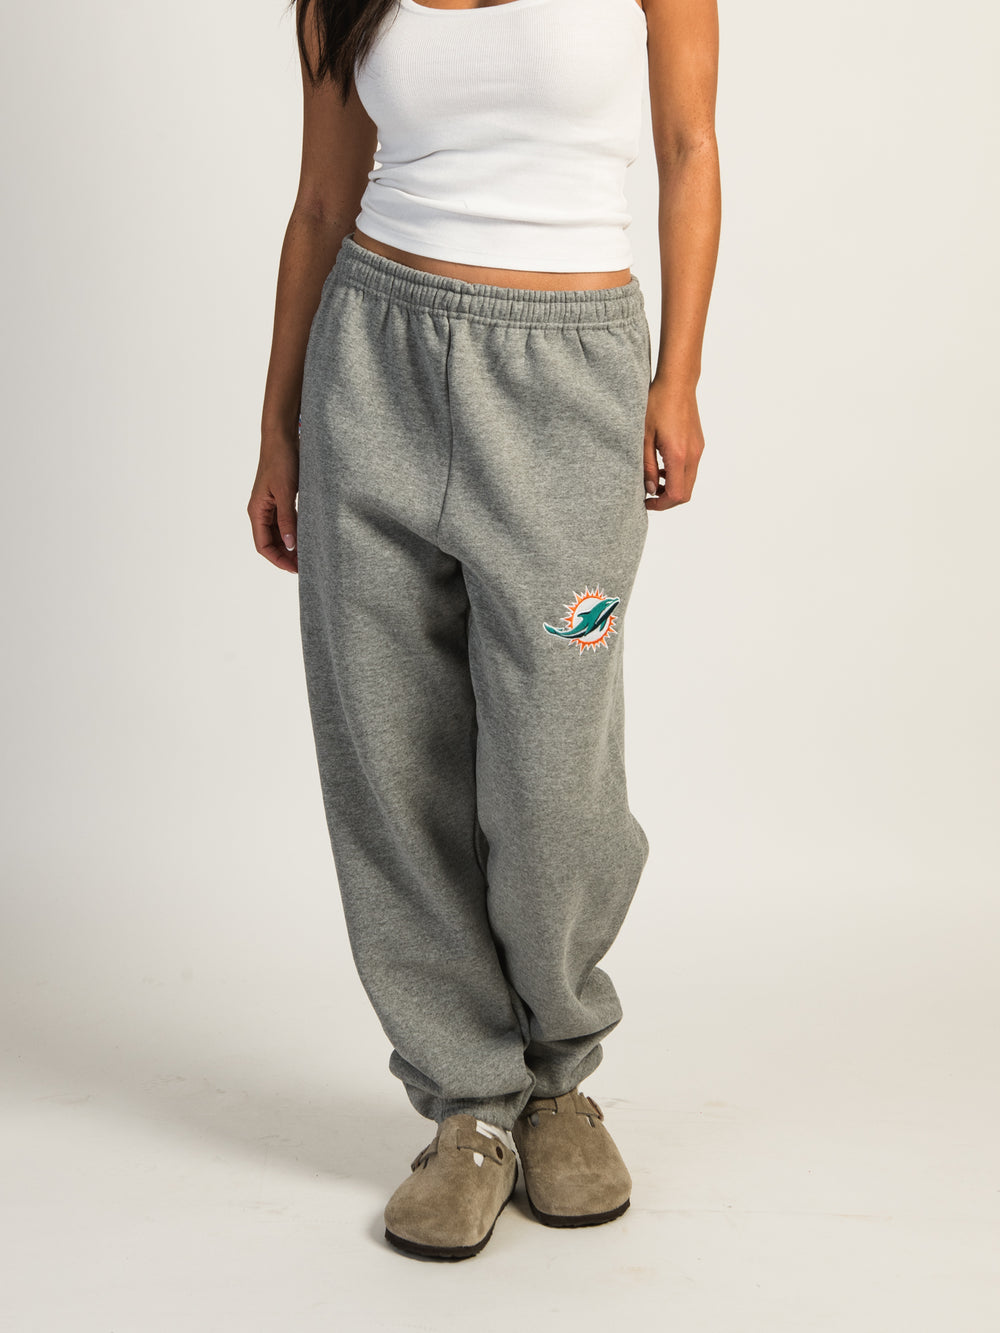 RUSSELL MIAMI DOLPHINS EMBROIDERED SWEATPANTS